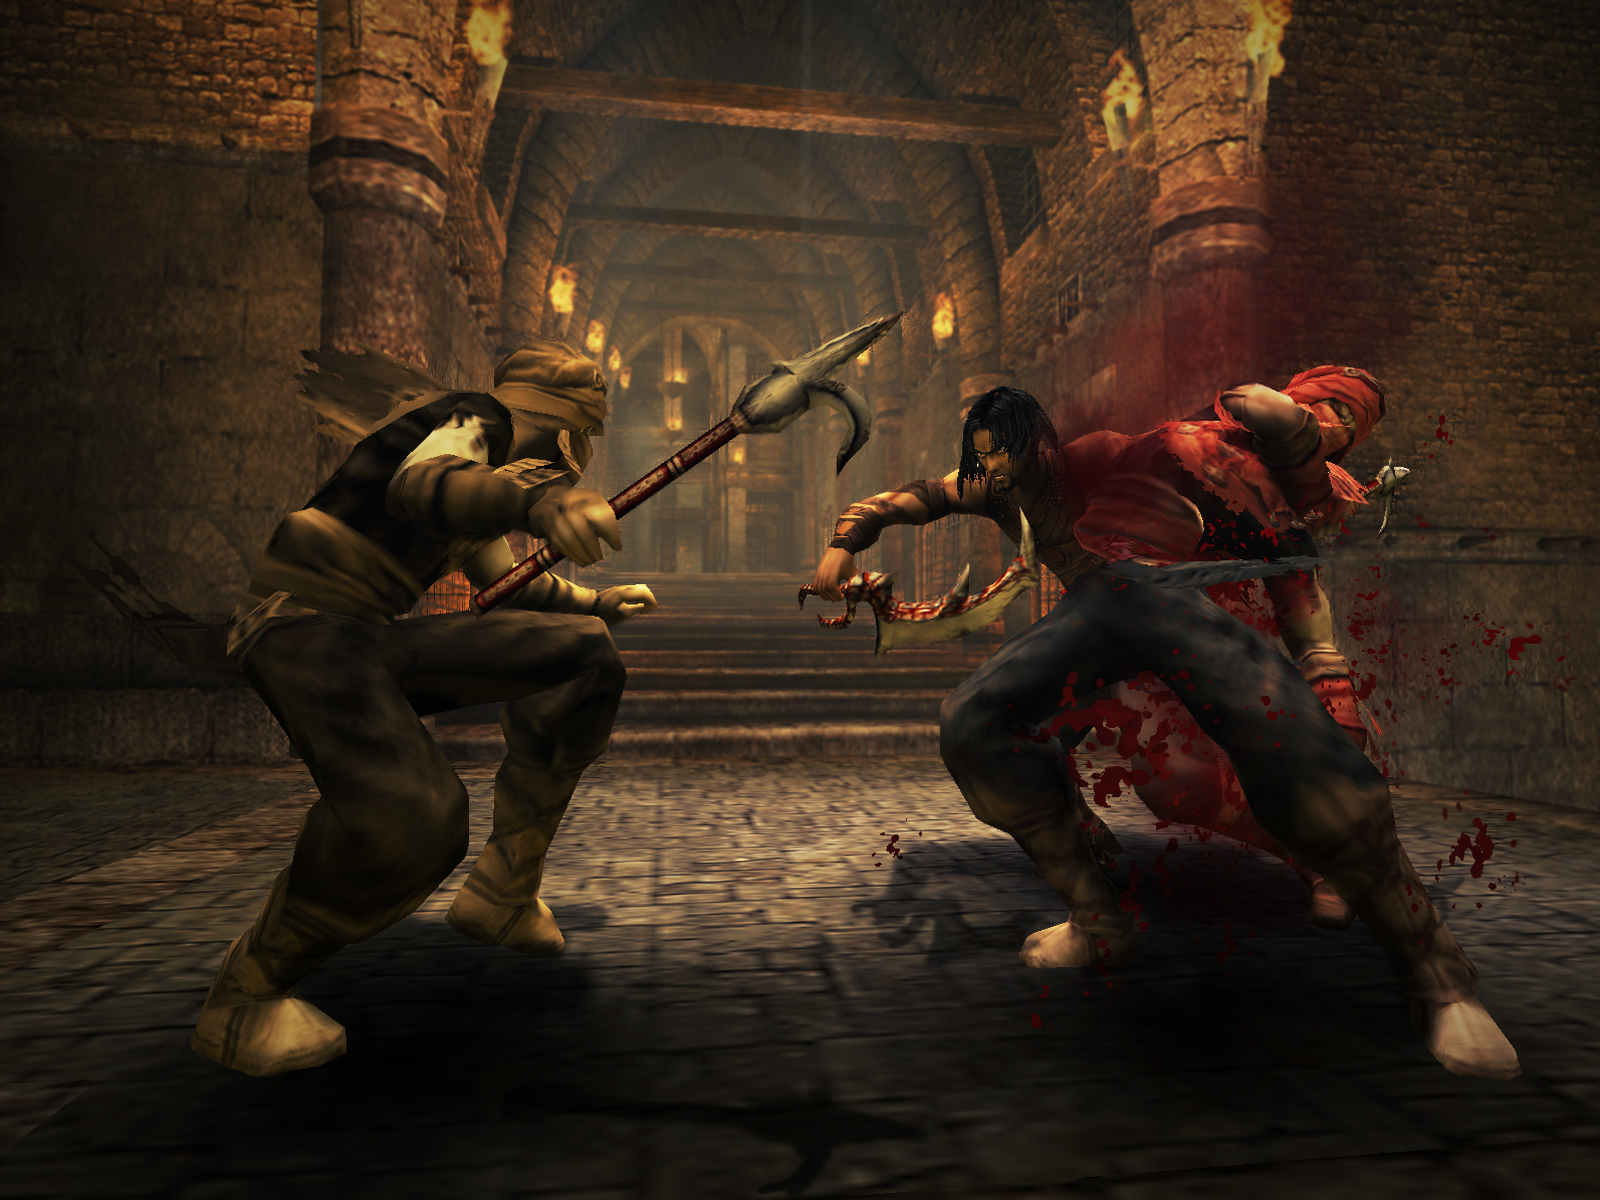 Download prince of persia 5 for pc highly compressed torrent pc